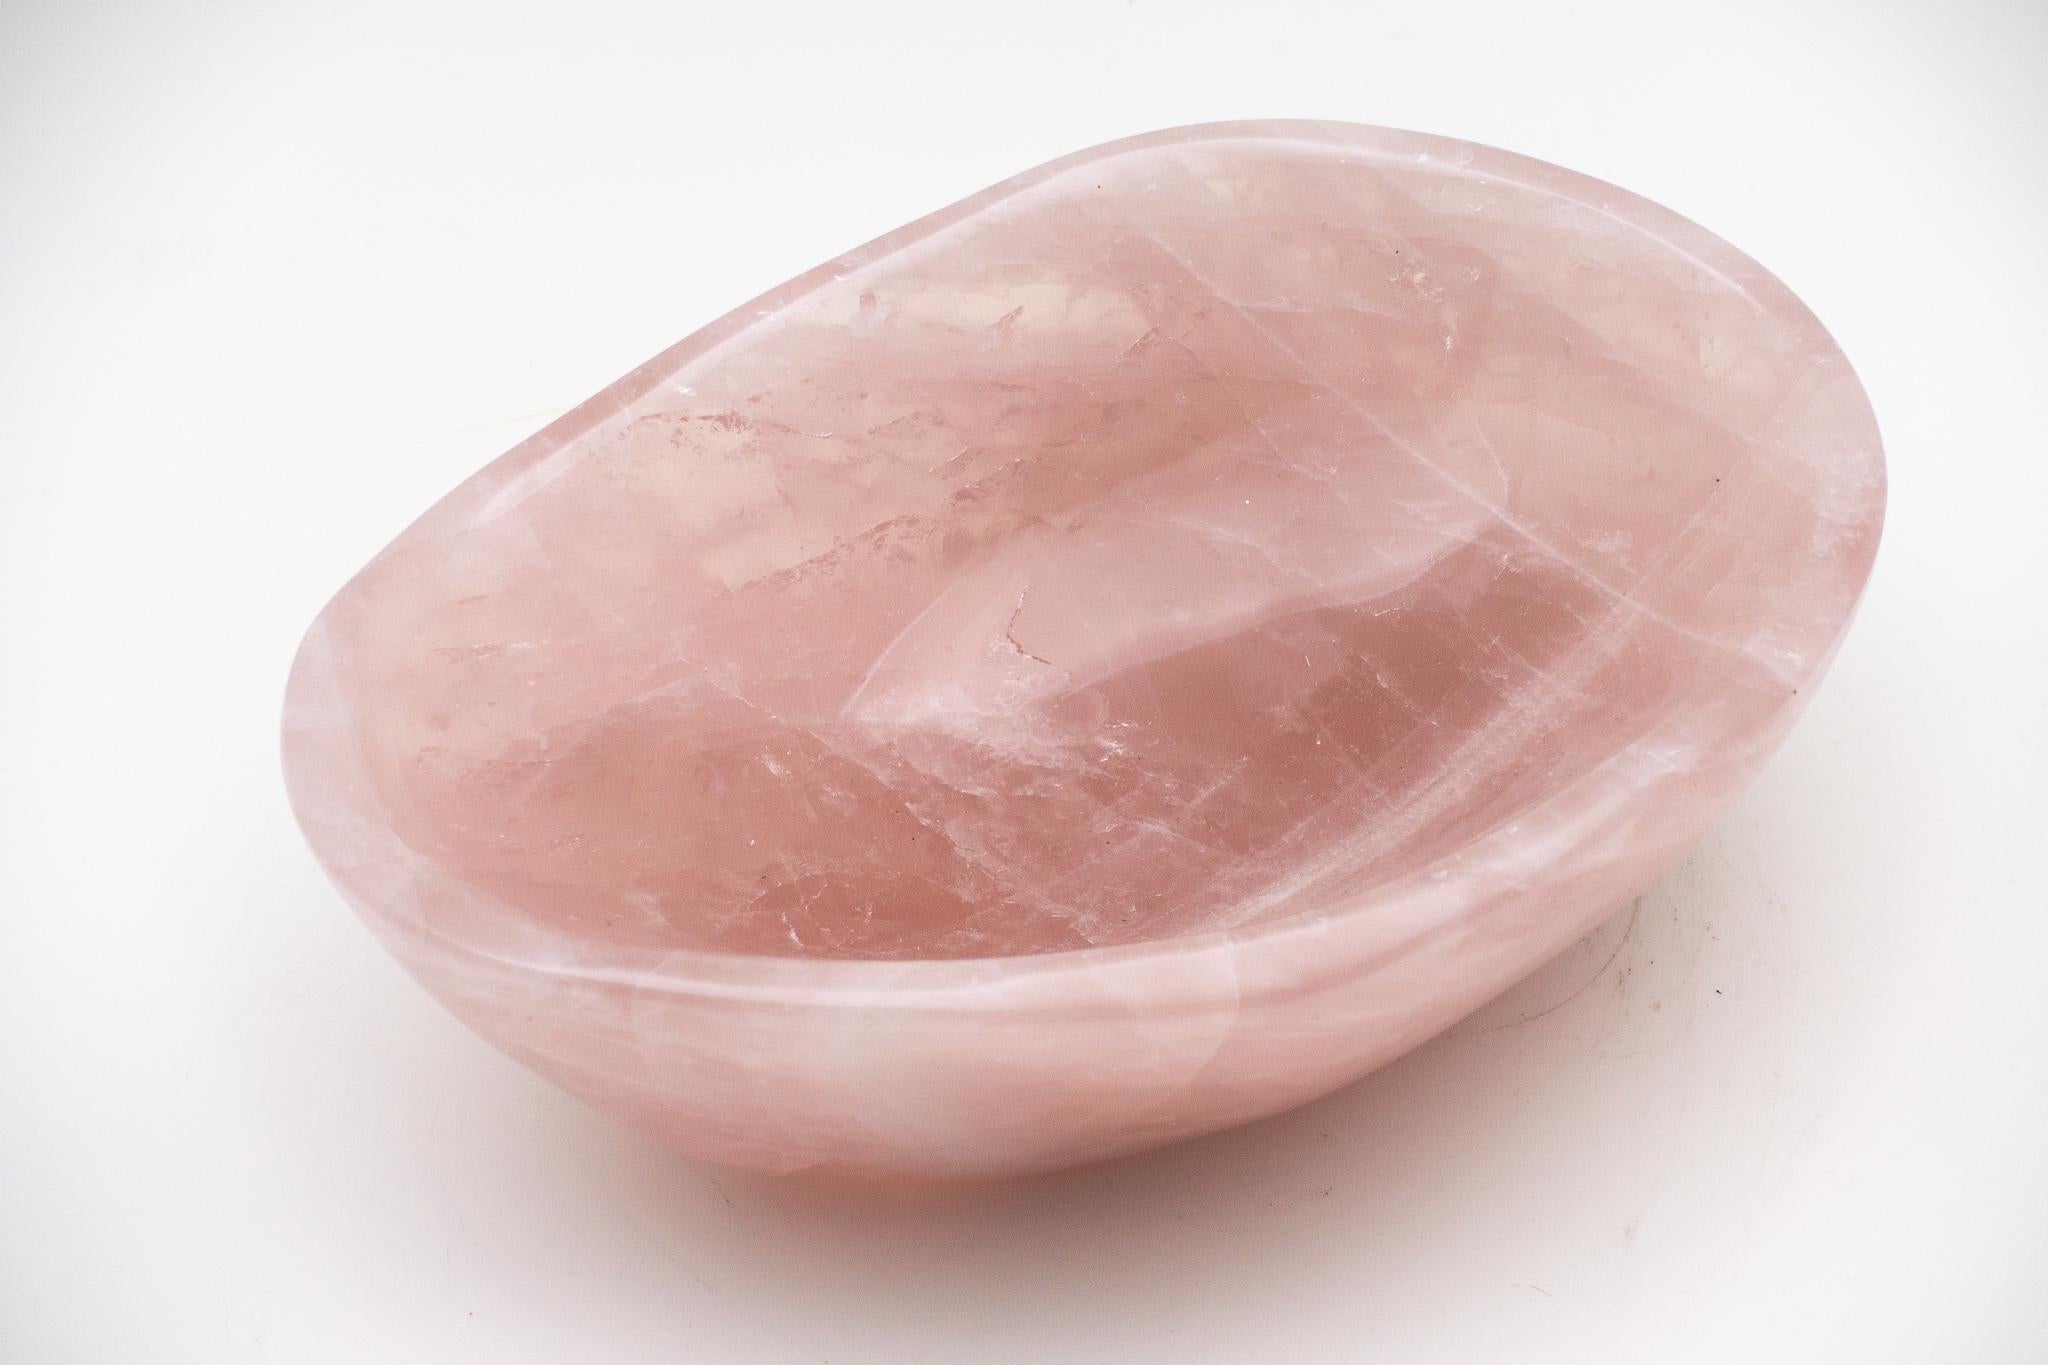 Hand-carved rose quartz vide-poche or coin tray from Madagascar. The vide-poche (empty-pocket in French) is a small bowl or container kept in a convenient location to empty your pockets into when you walk through the door.